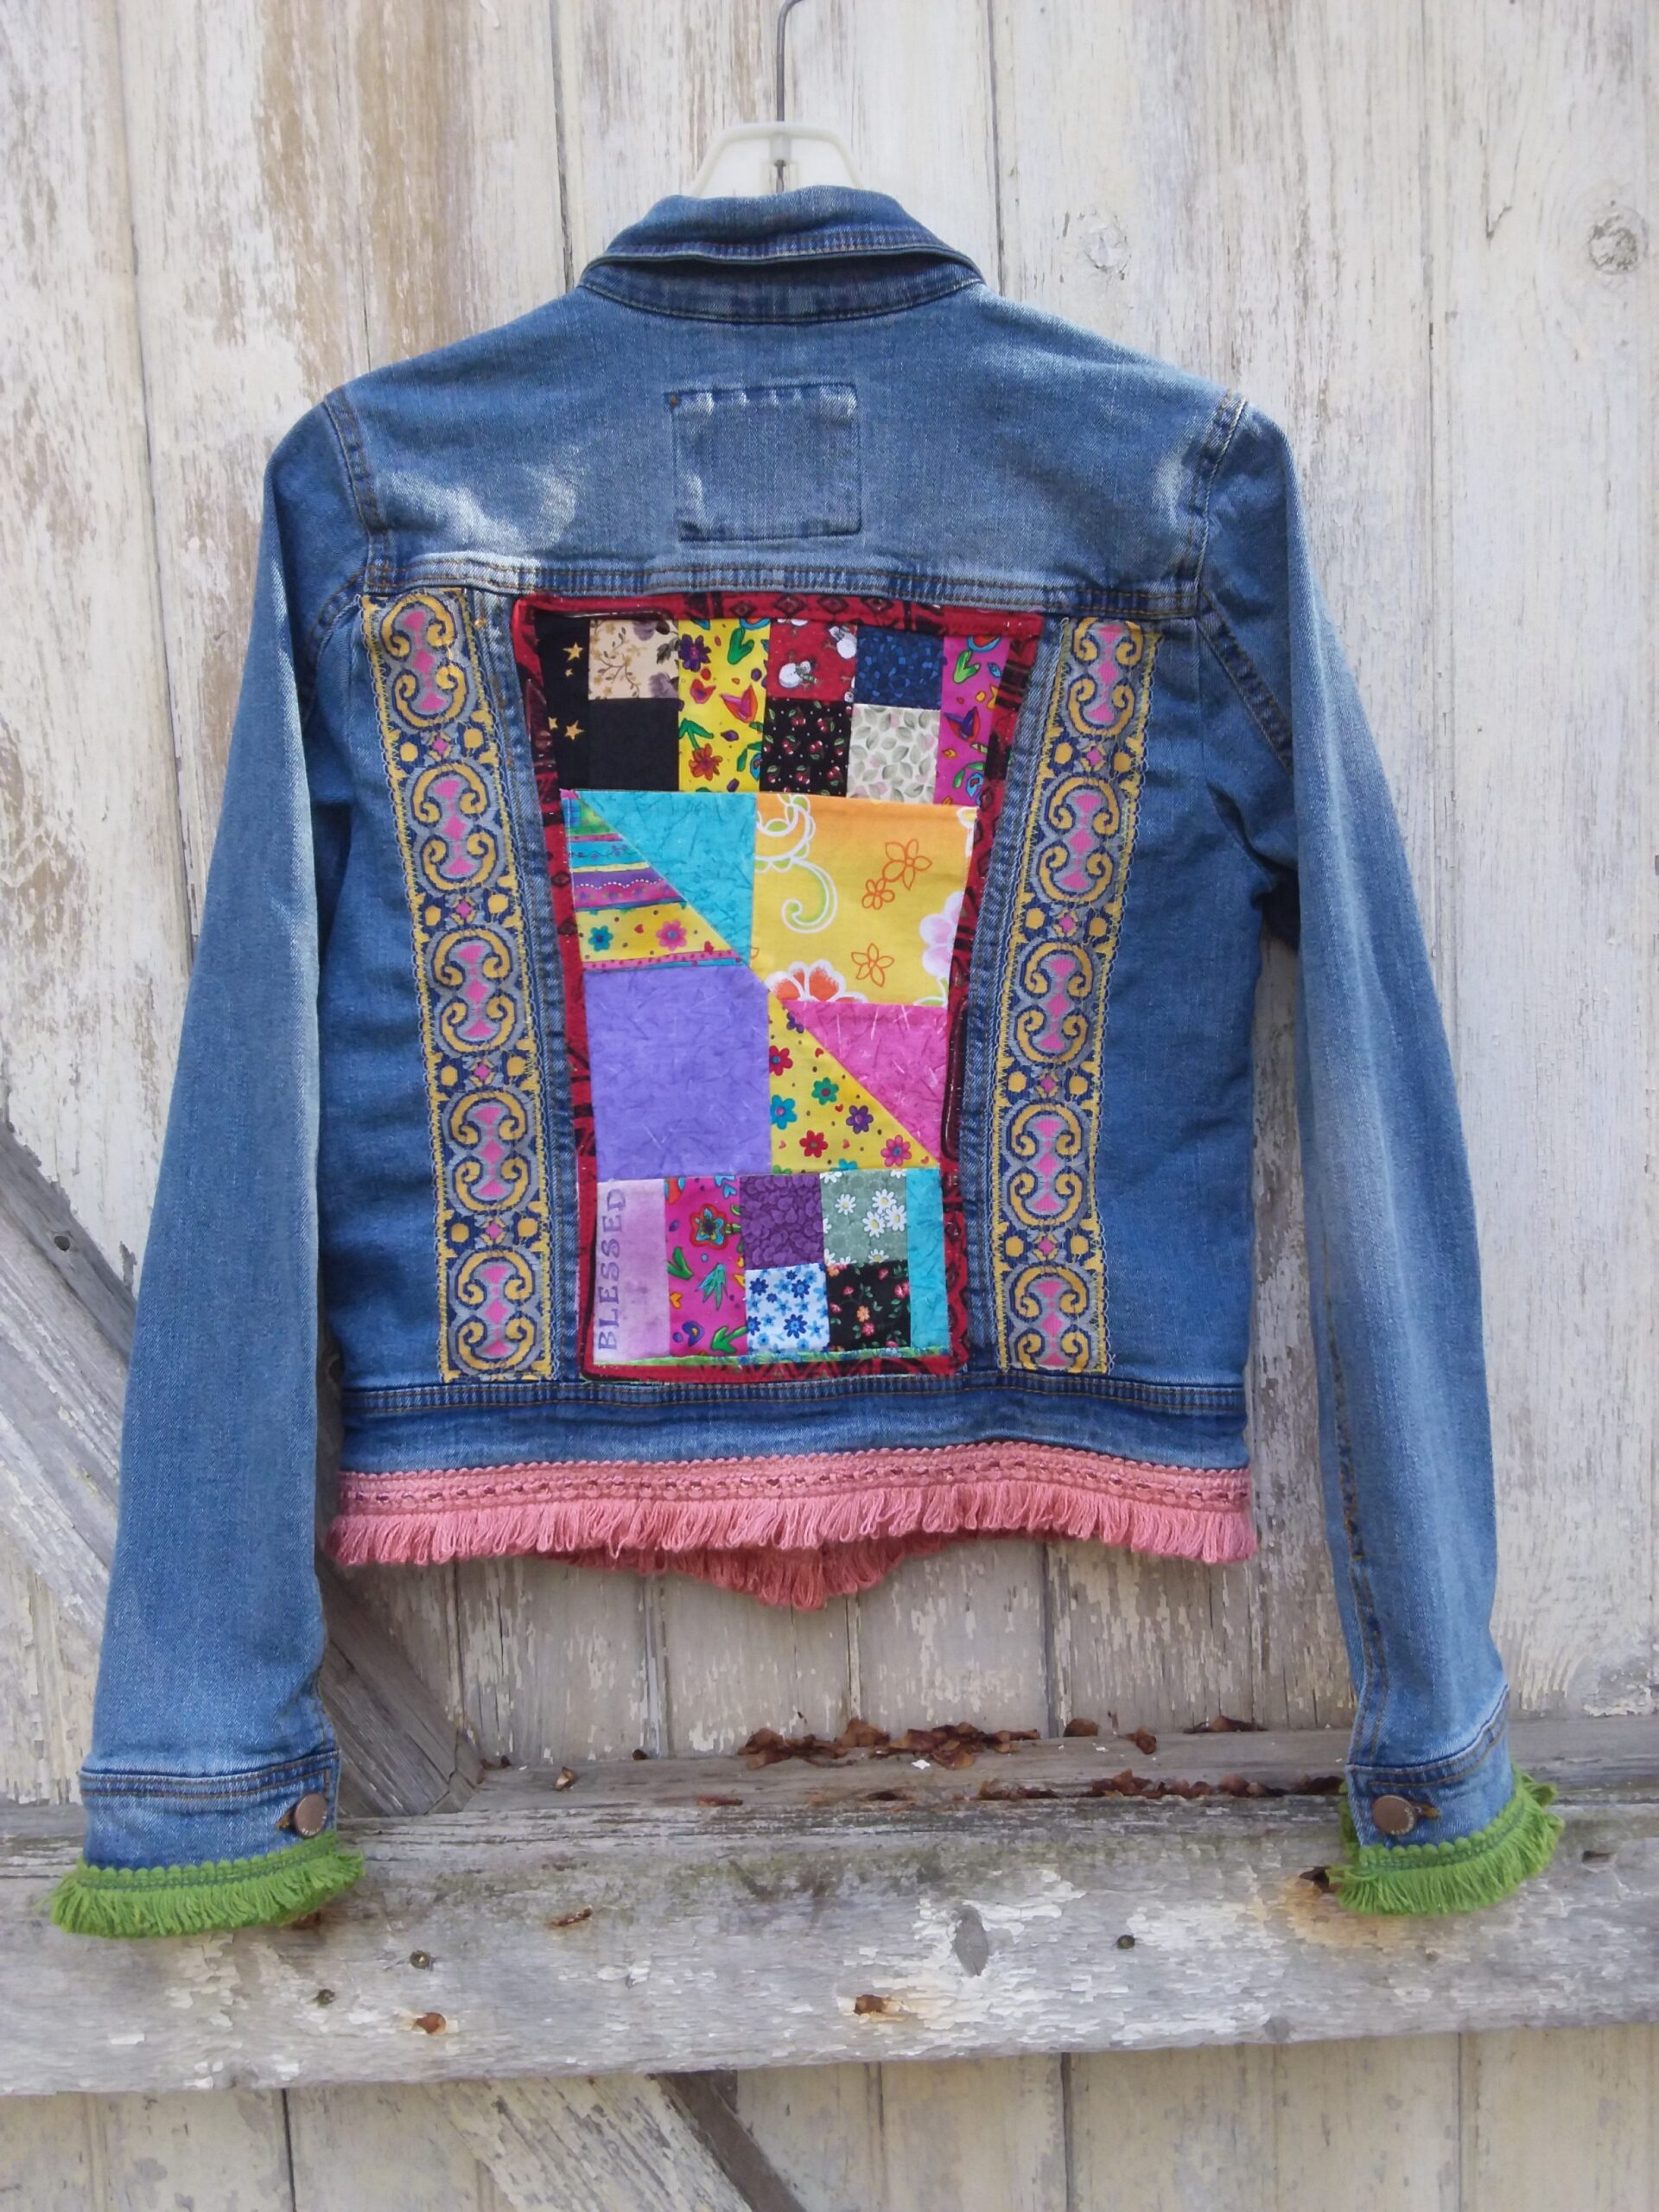 Upcycled denim jacket with bright patchwork panel, lace trim and funky fringe.